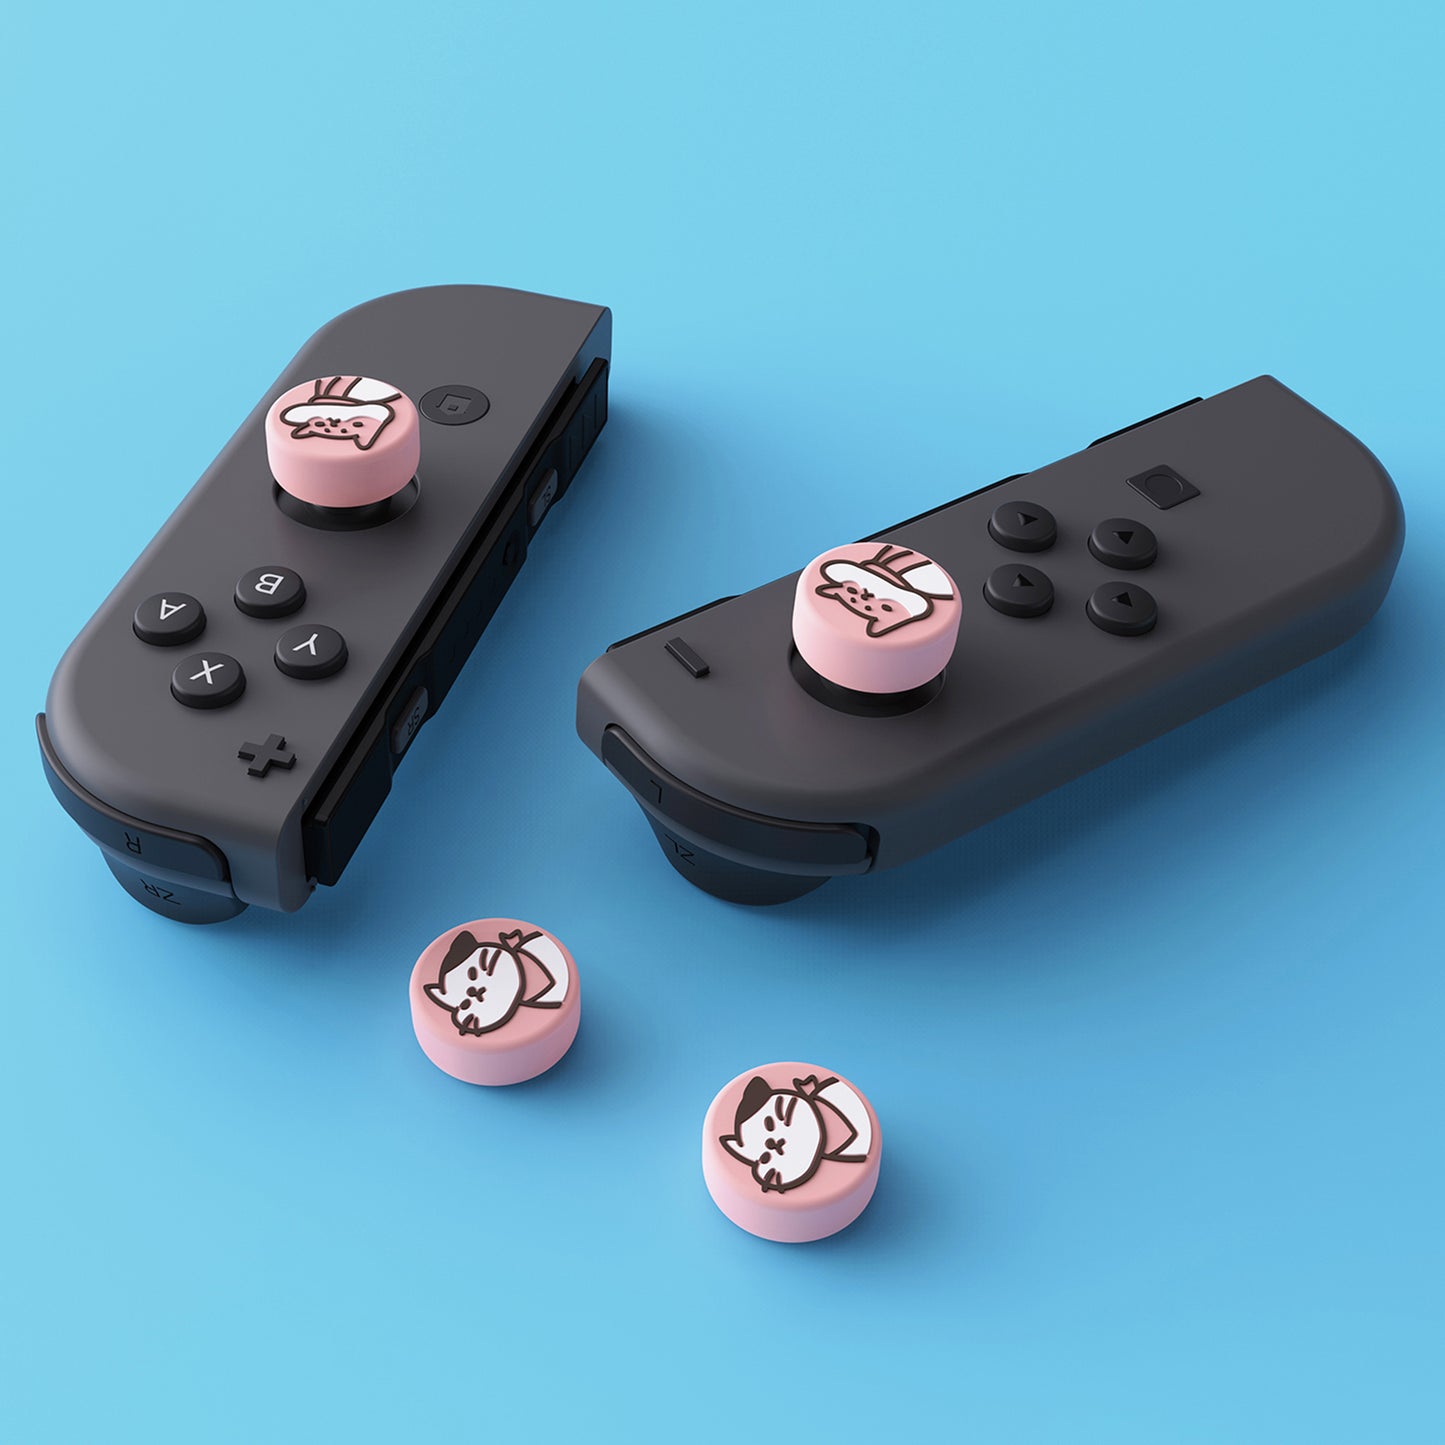 PlayVital Kitten & Doggie Cute Switch Thumb Grip Caps, Joystick Caps for Nintendo Switch Lite, Silicone Analog Cover Thumbstick Grips for Switch OLED Joycon - Pale Red - NJM1112 playvital